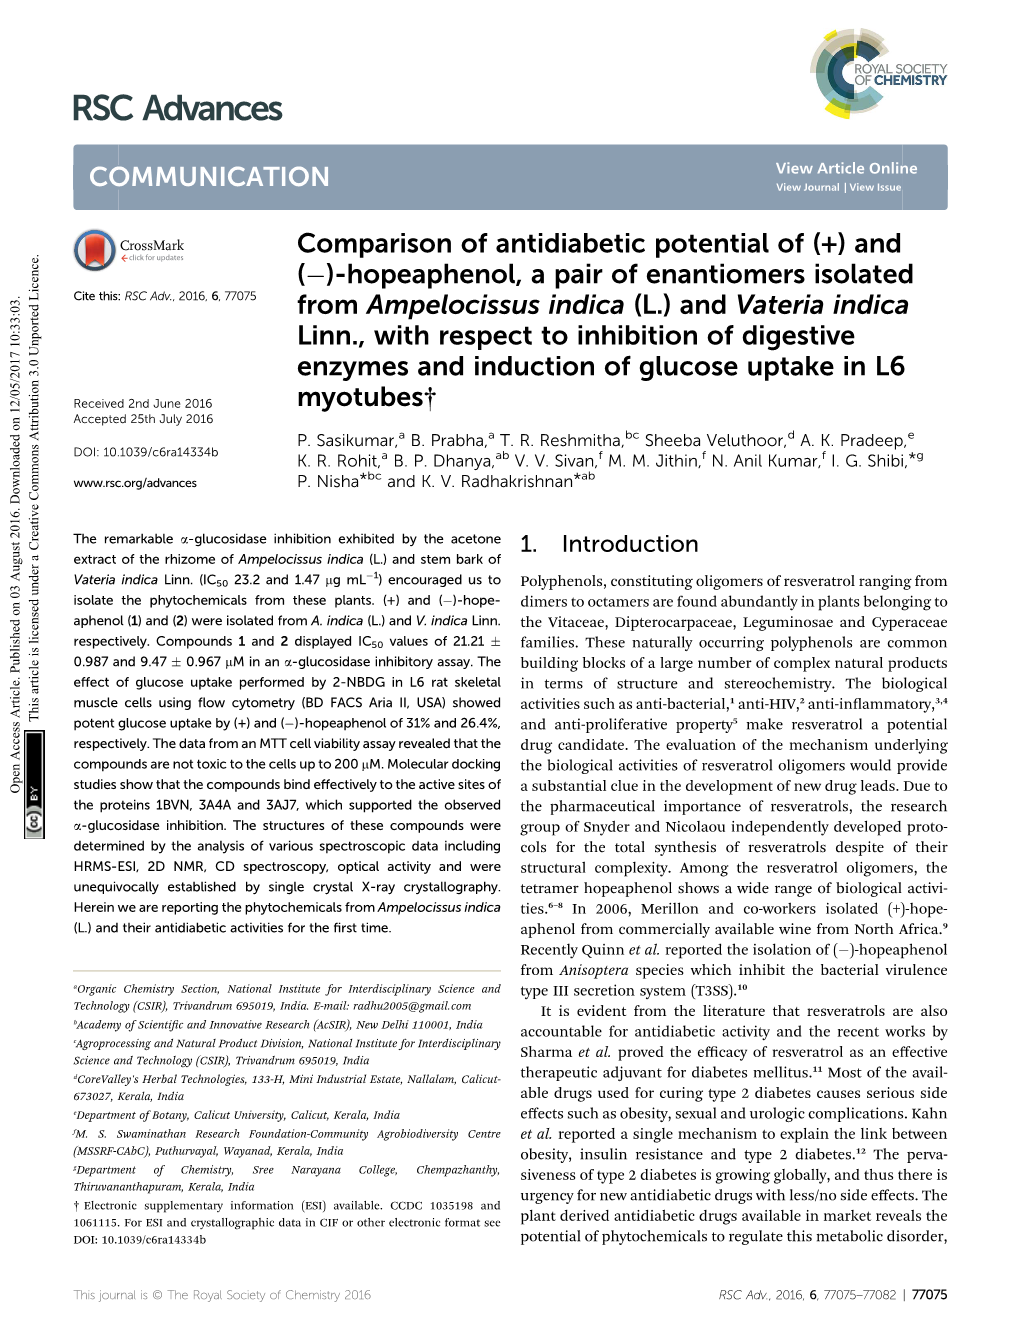 Comparison of Antidiabetic Potential of (+) and (−)-Hopeaphenol, a Pair Of